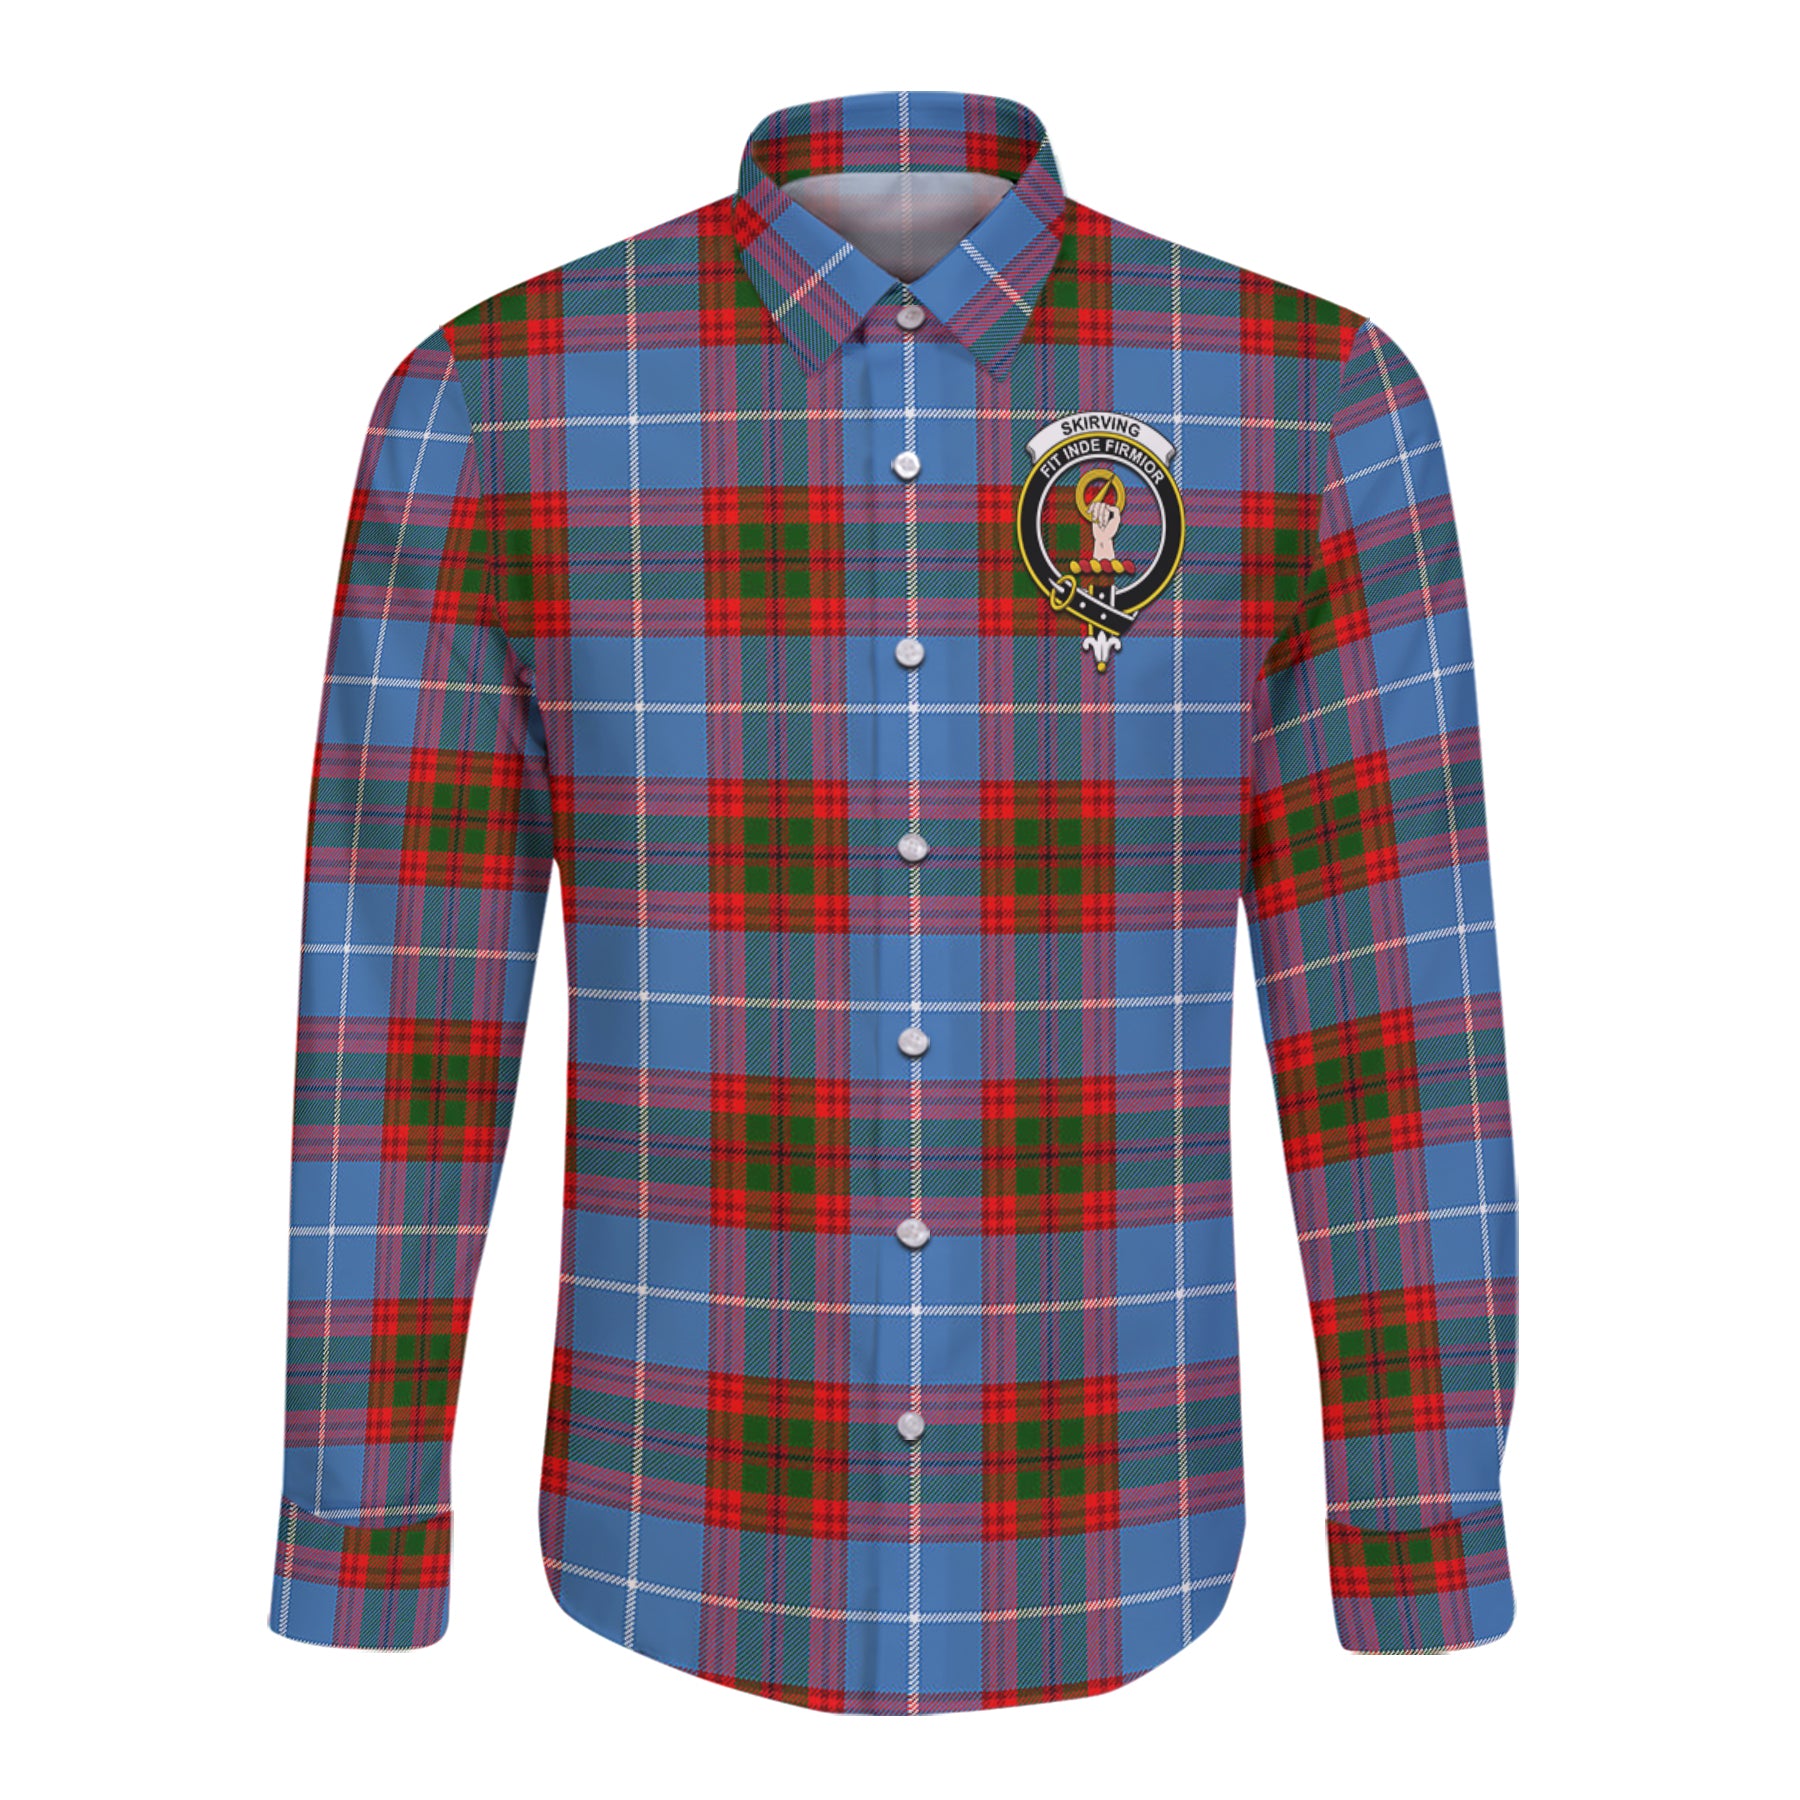 Skirving Tartan Long Sleeve Button Up Shirt with Scottish Family Crest K23